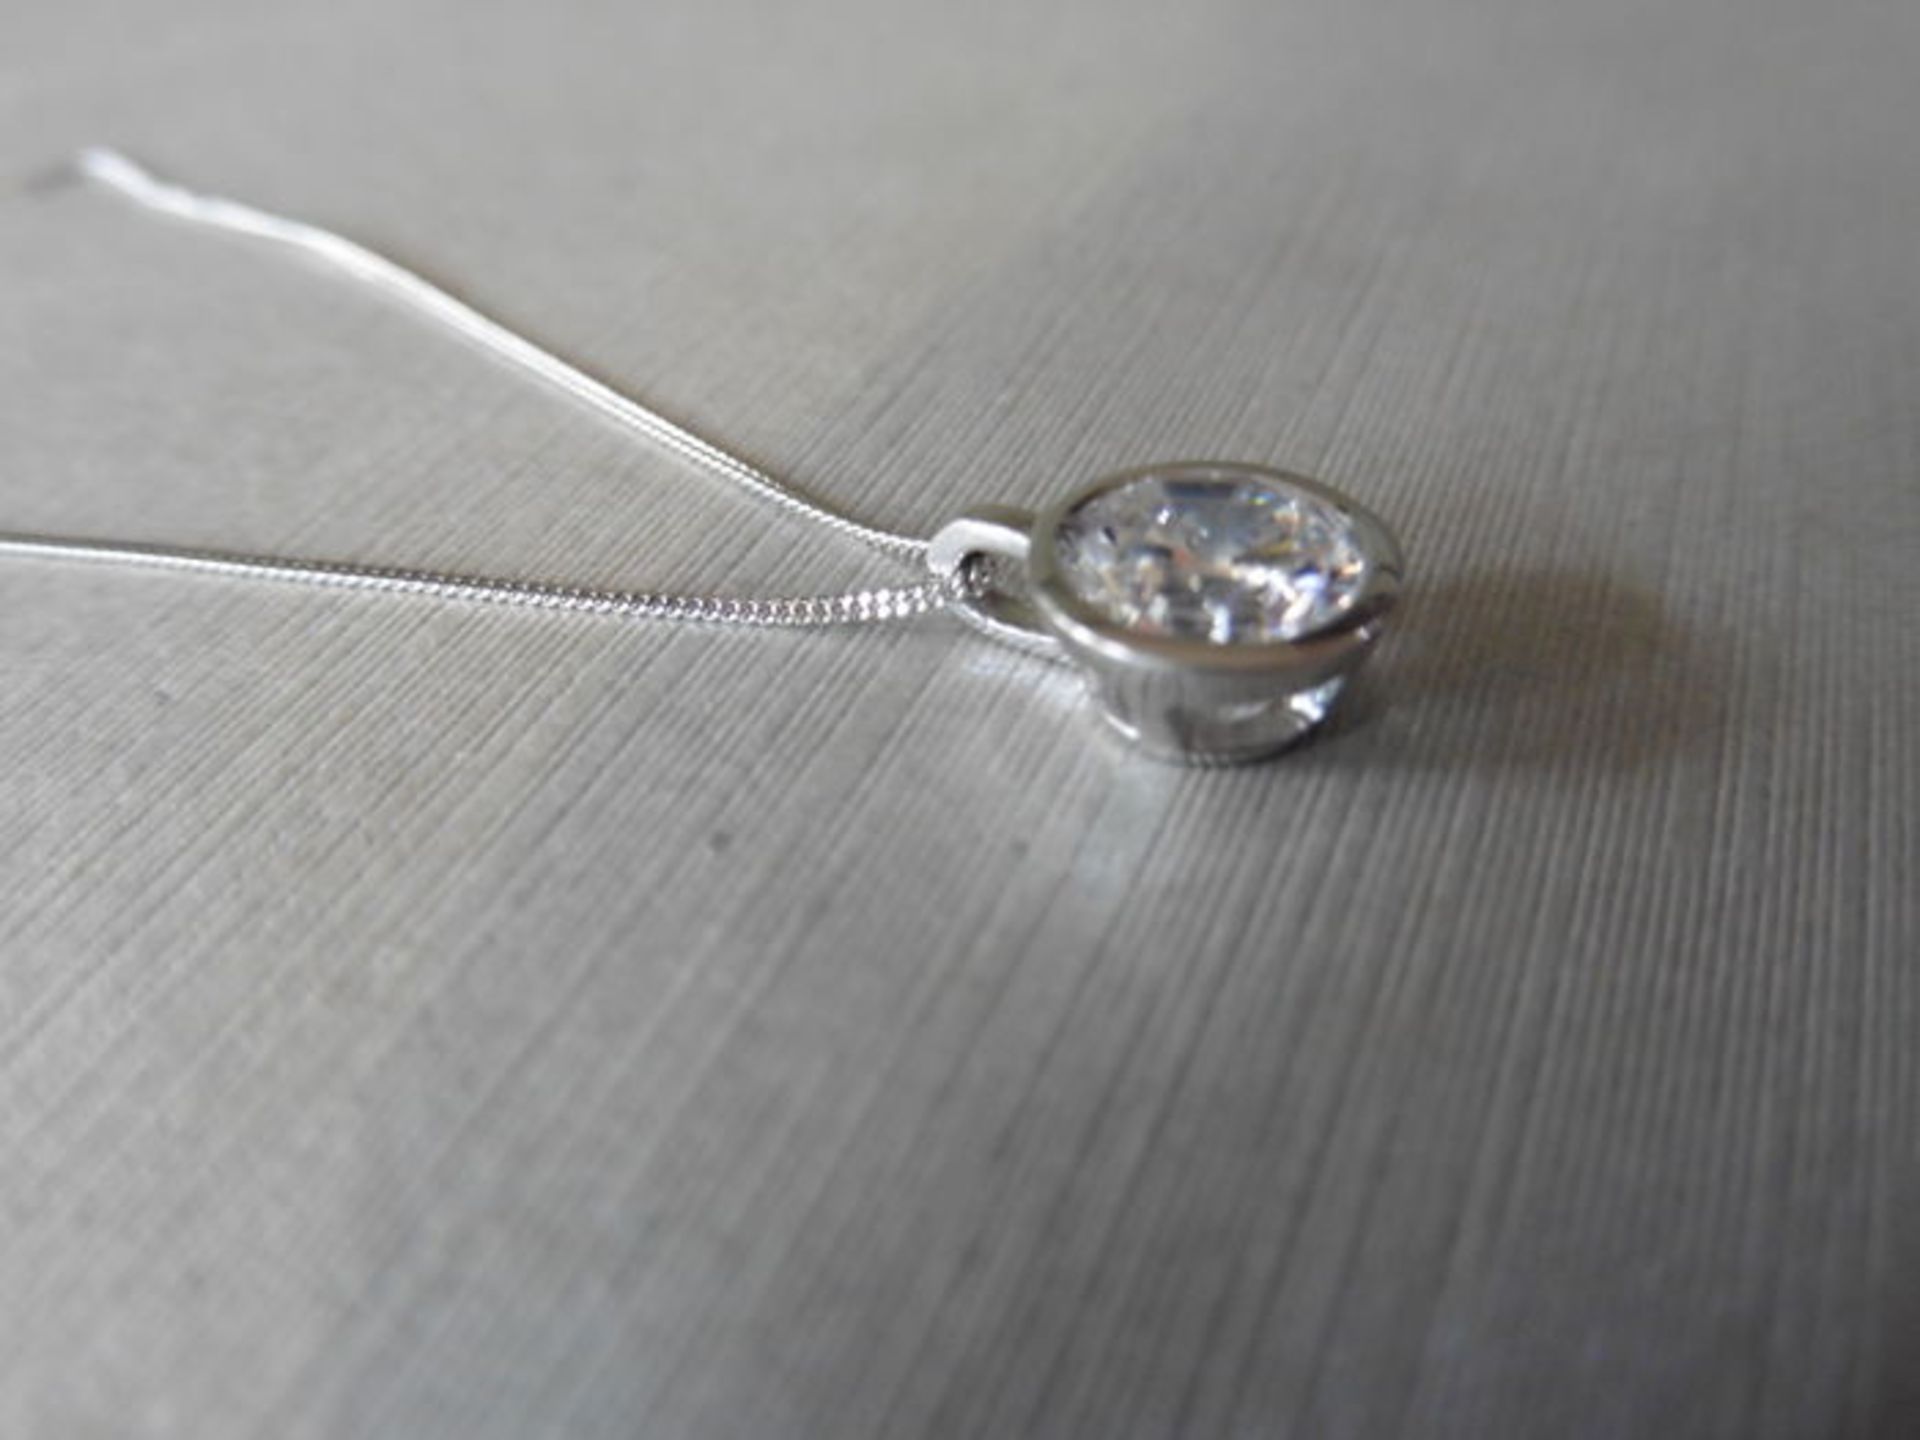 1ct diamond solitaire style pendant. Enhanced brilliant cut diamond, H colour and P1 clarity. Set in - Image 2 of 2